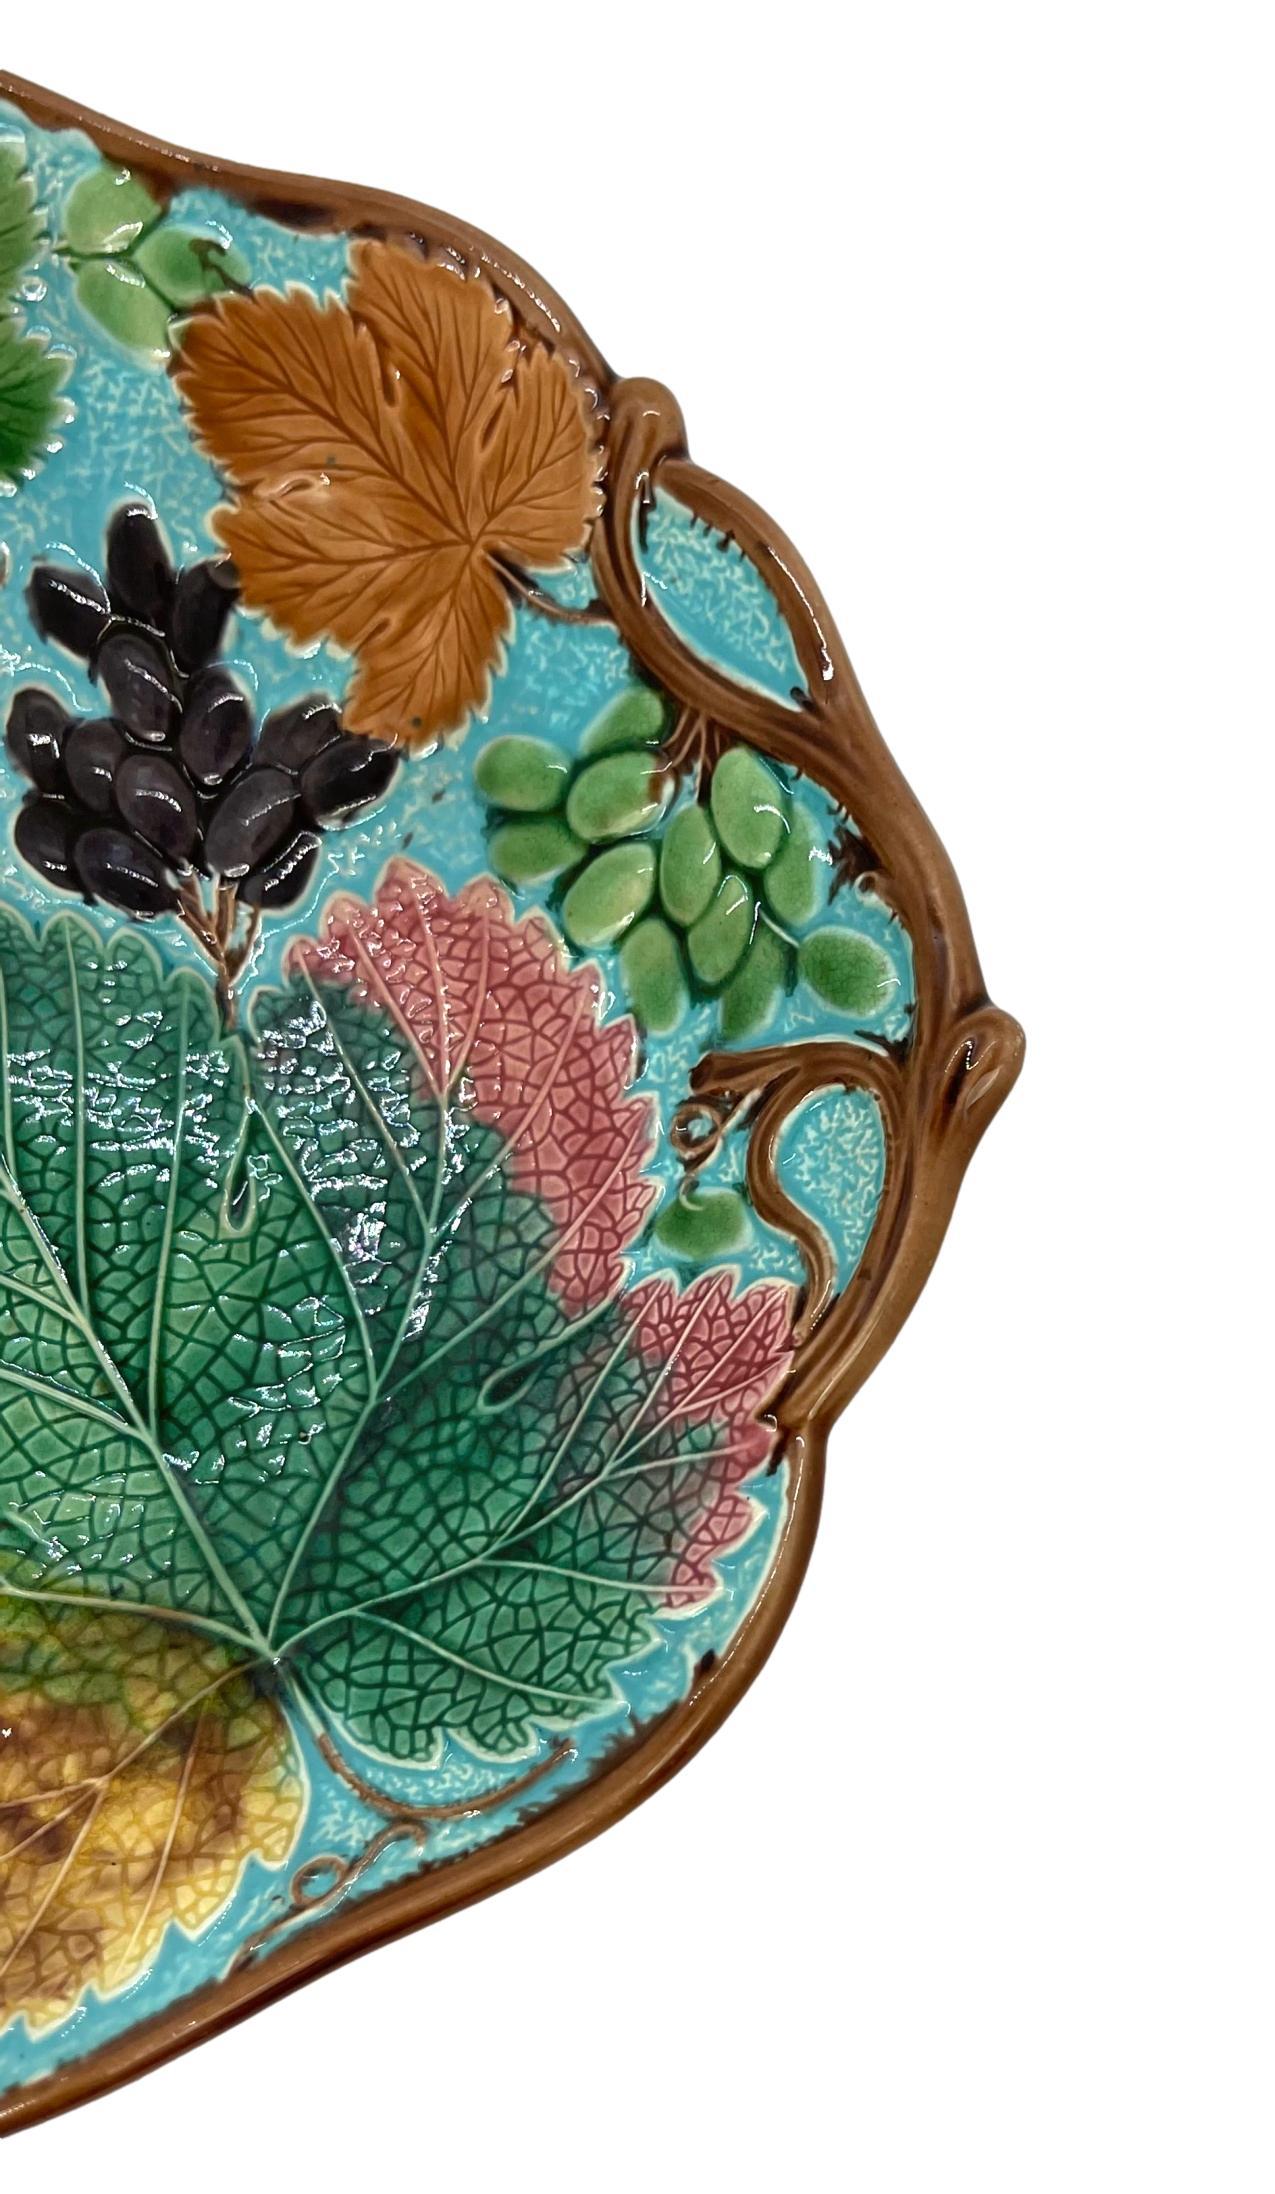 English Wedgwood Majolica Grape, Leaf and Vine Bread Tray on Turquoise Ground, Date 1877